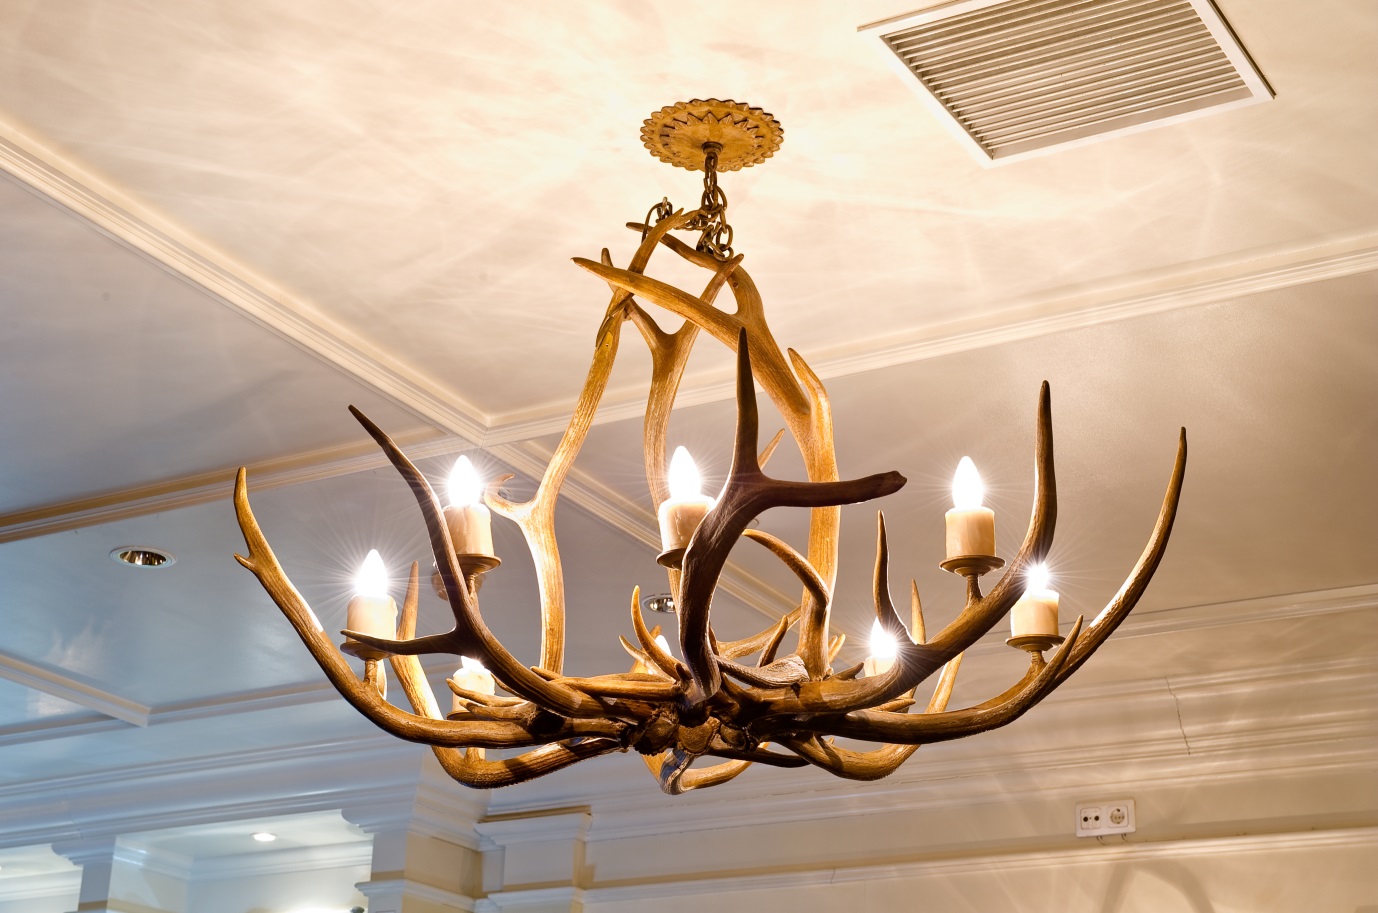 Antler Lamps And Chandeliers Improves Rustic Lighting